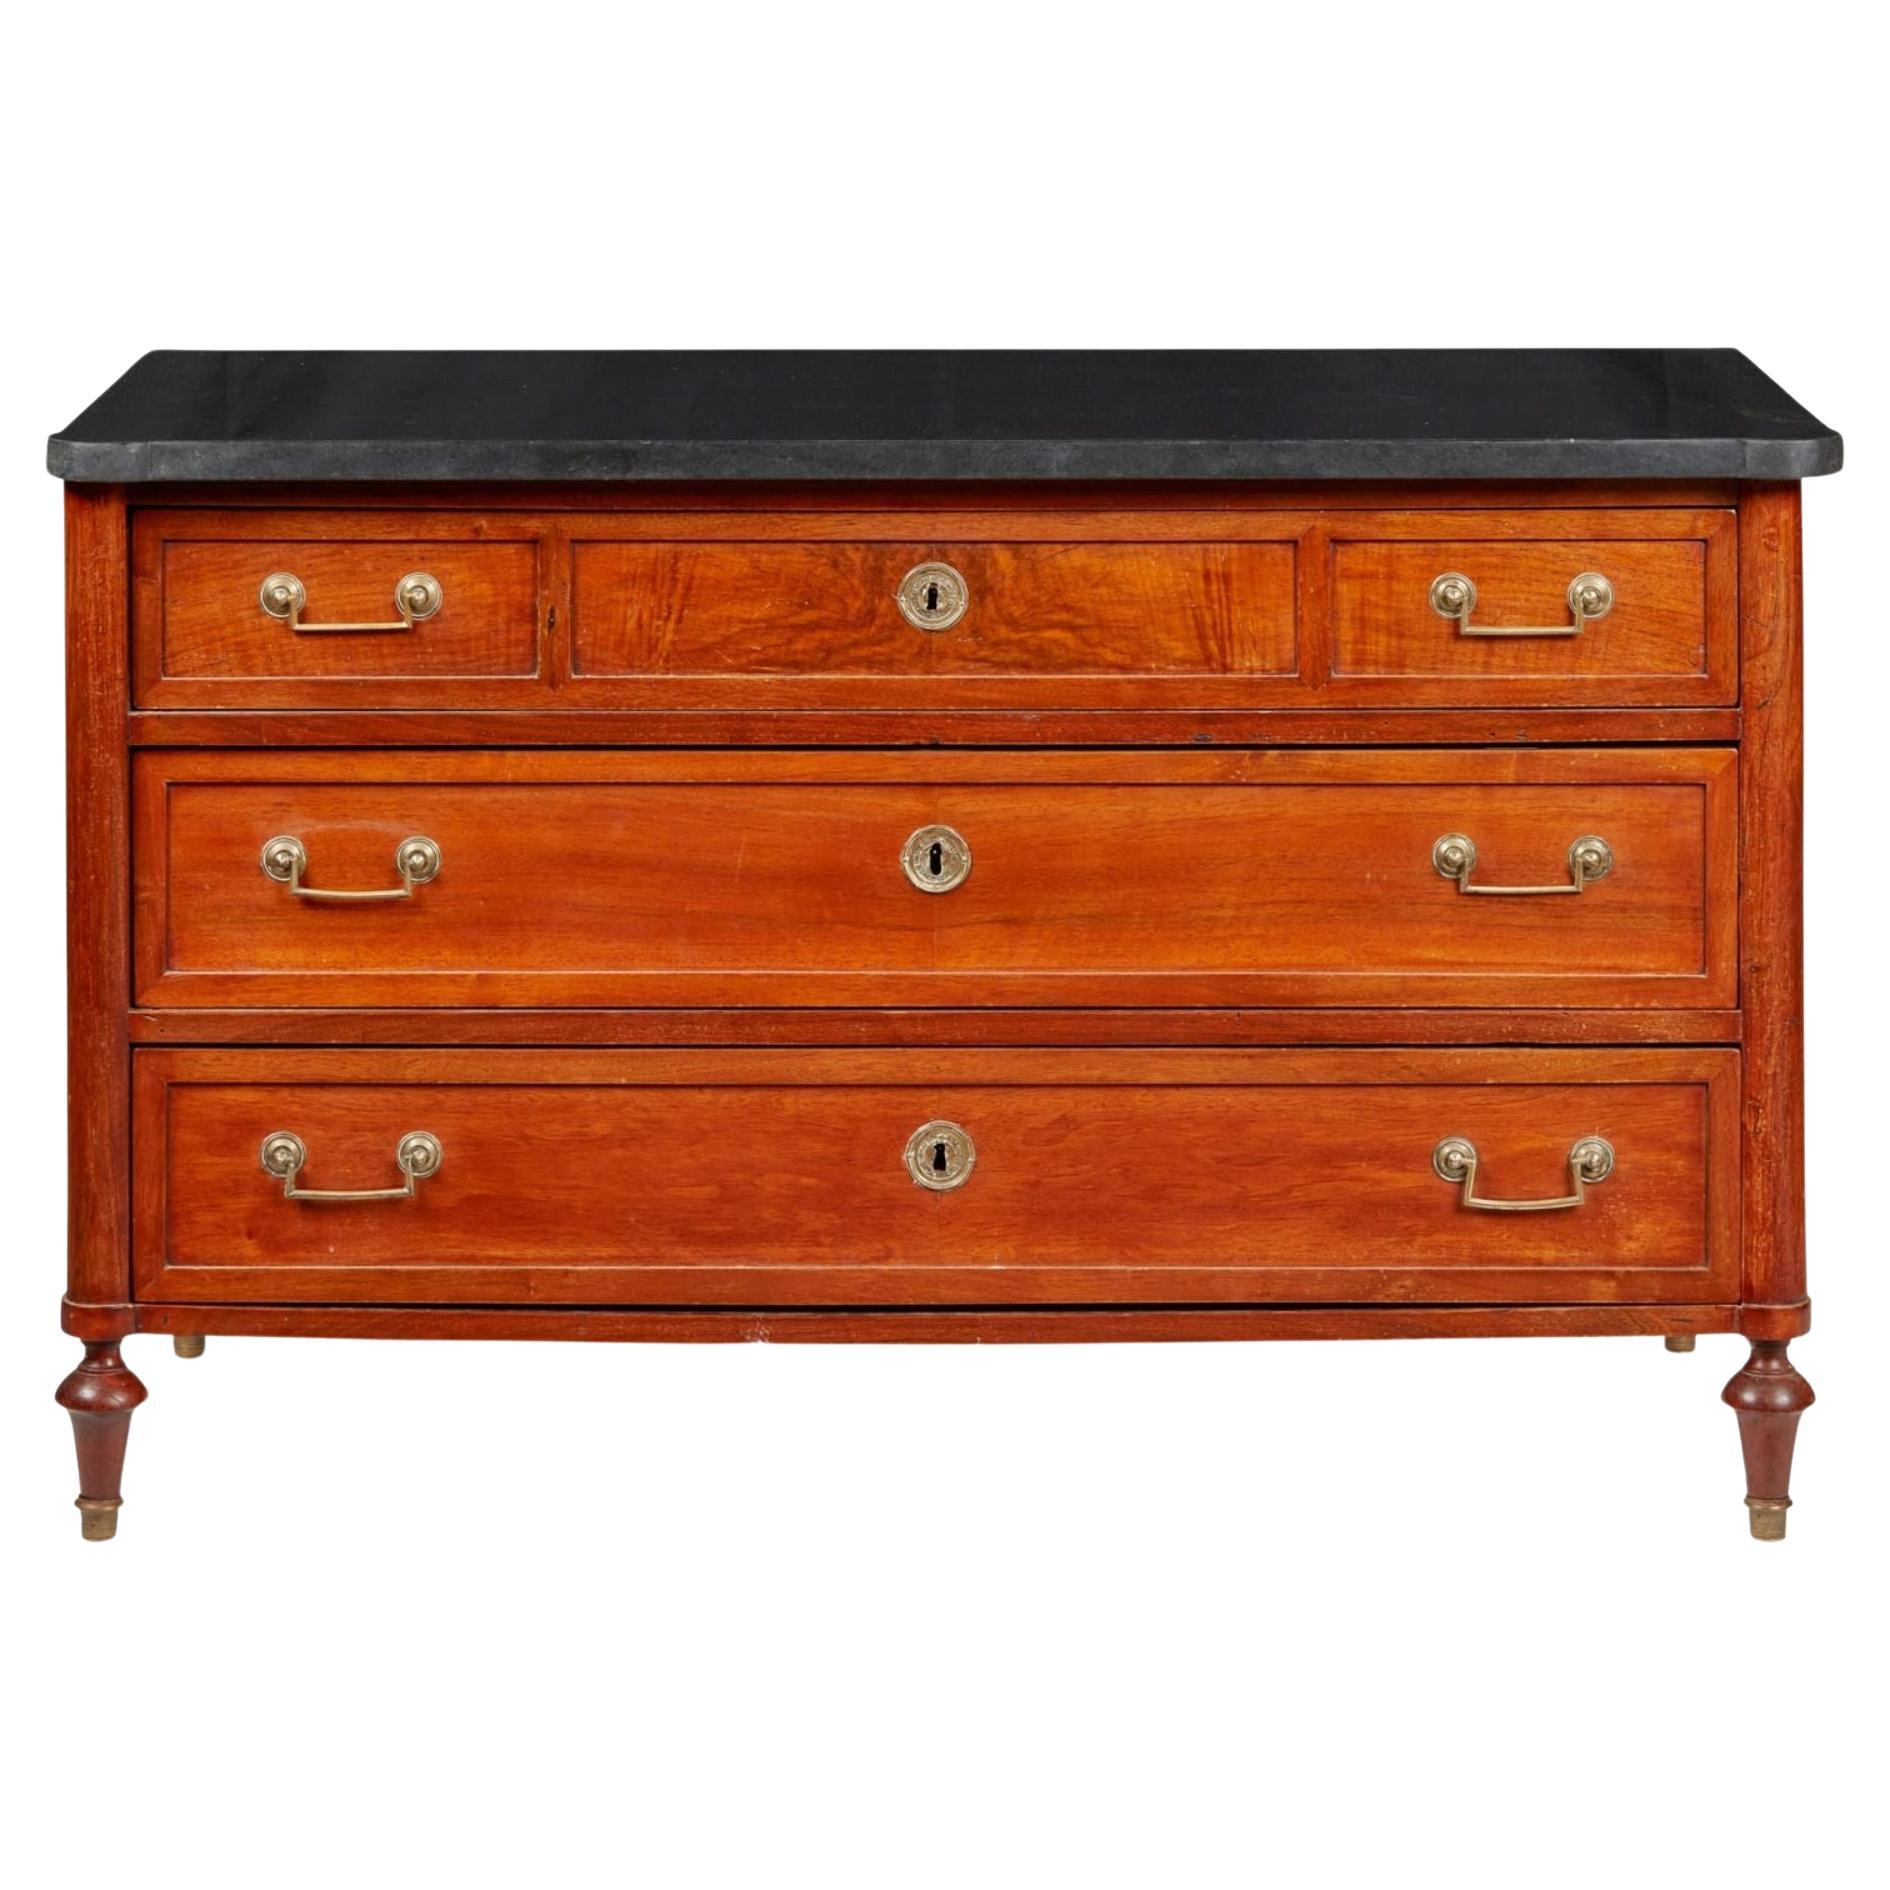 Italian Fruitwood Commode, Late 18th Century For Sale